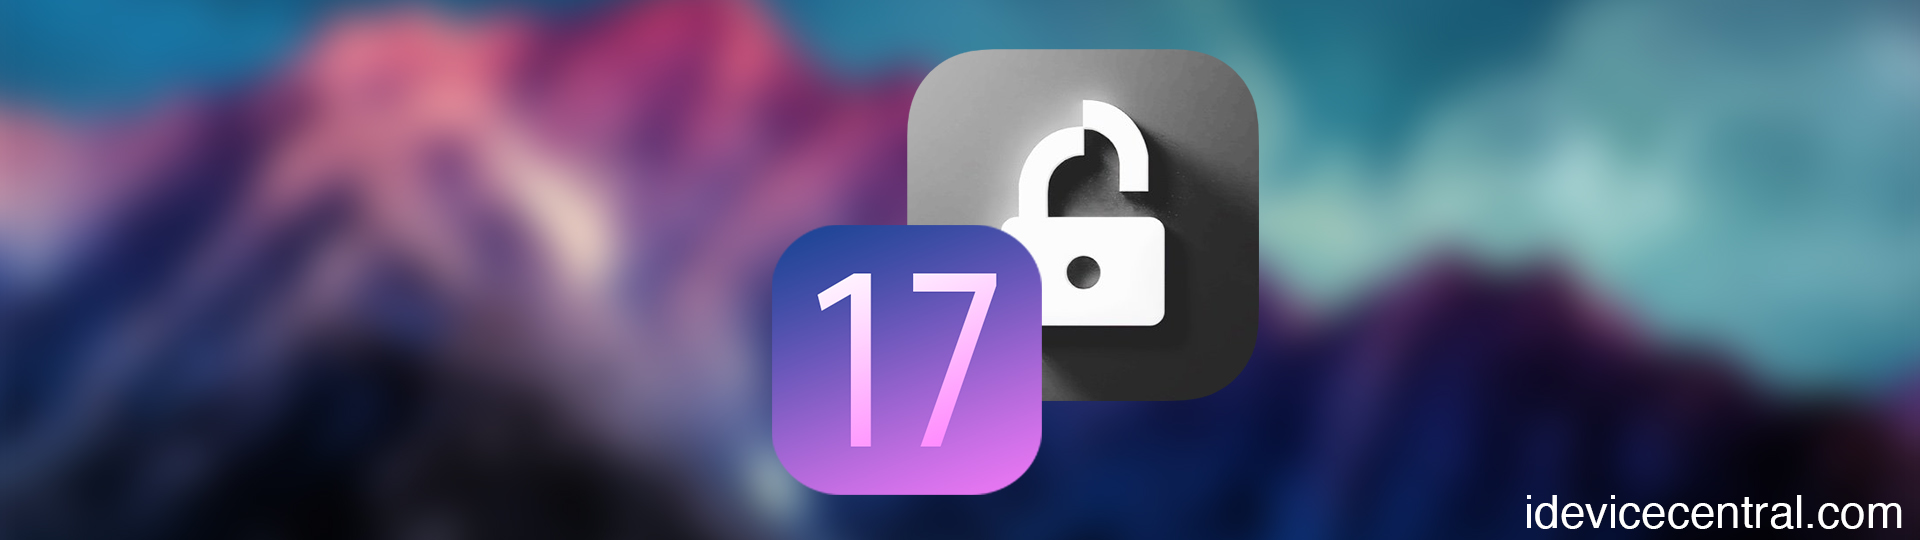 iOS 17.4 Third-Party App Stores Are Very Limited, Here’s The Best Alternative That Works